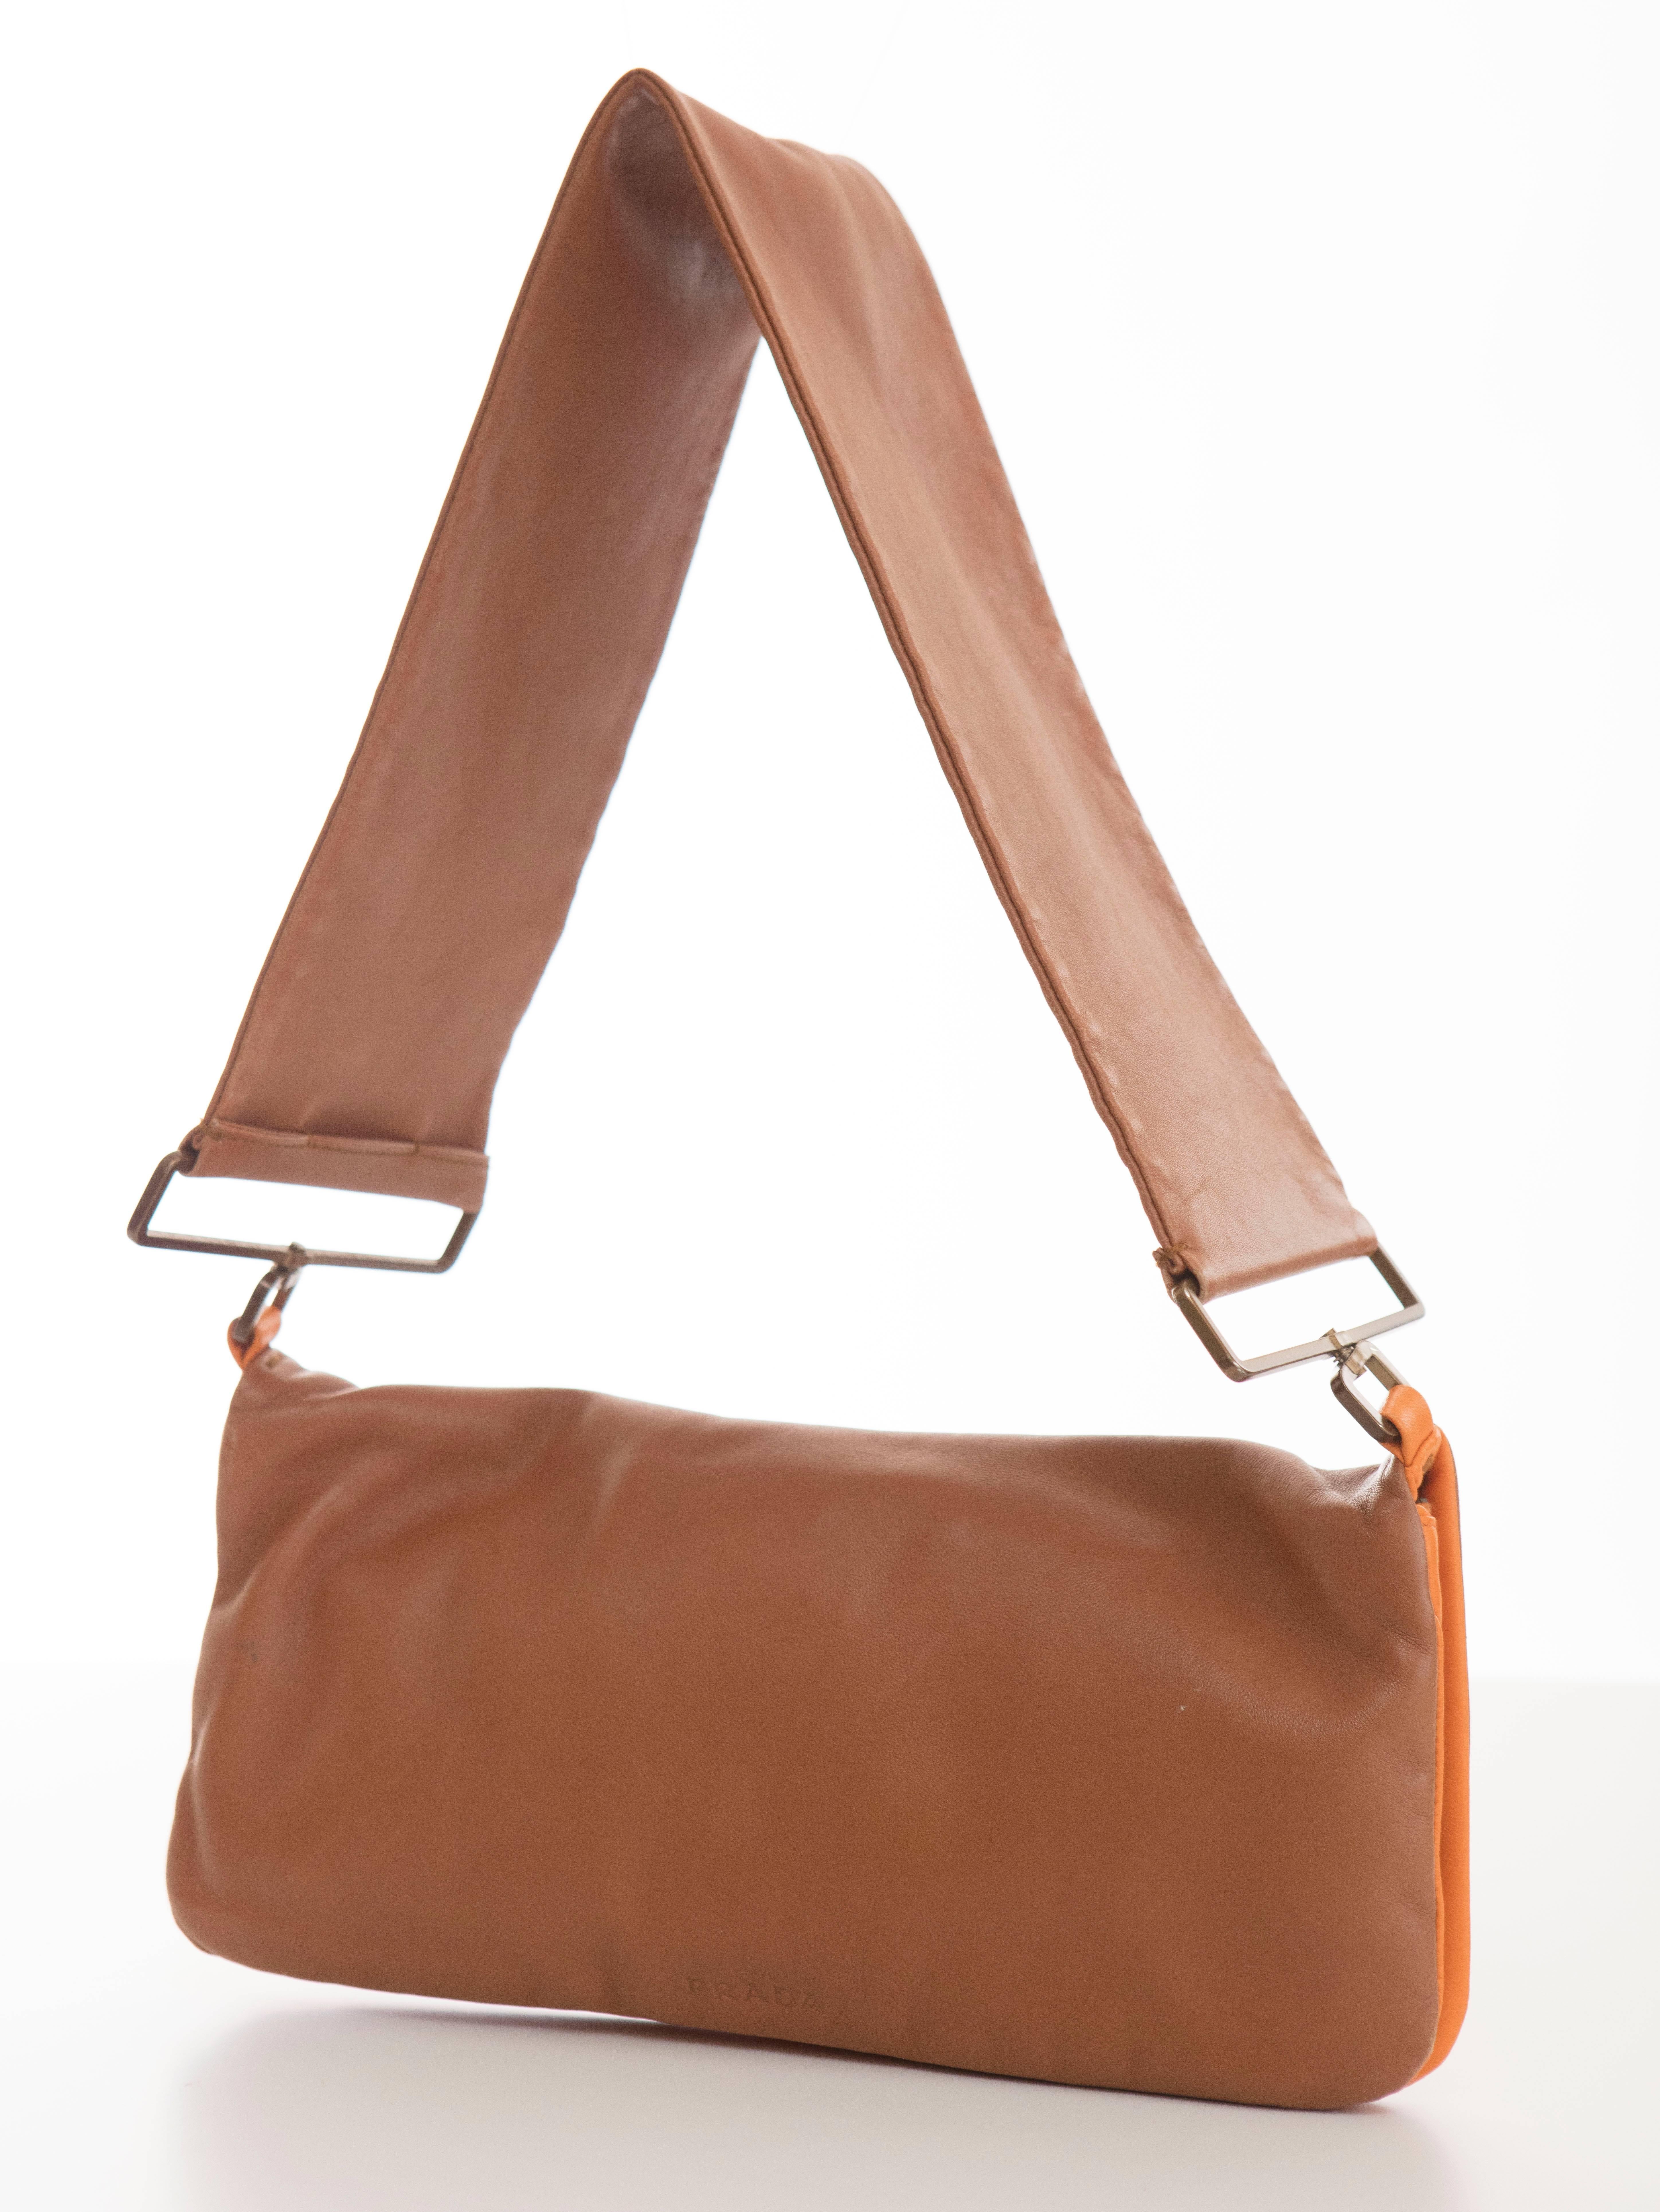 Prada snap front, cognac and tangerine leather shoulder bag with zip closure and fully lined in satin.

Width 11, Height 5.5, With Strap 15, Width of Strap 3.5, Depth .5